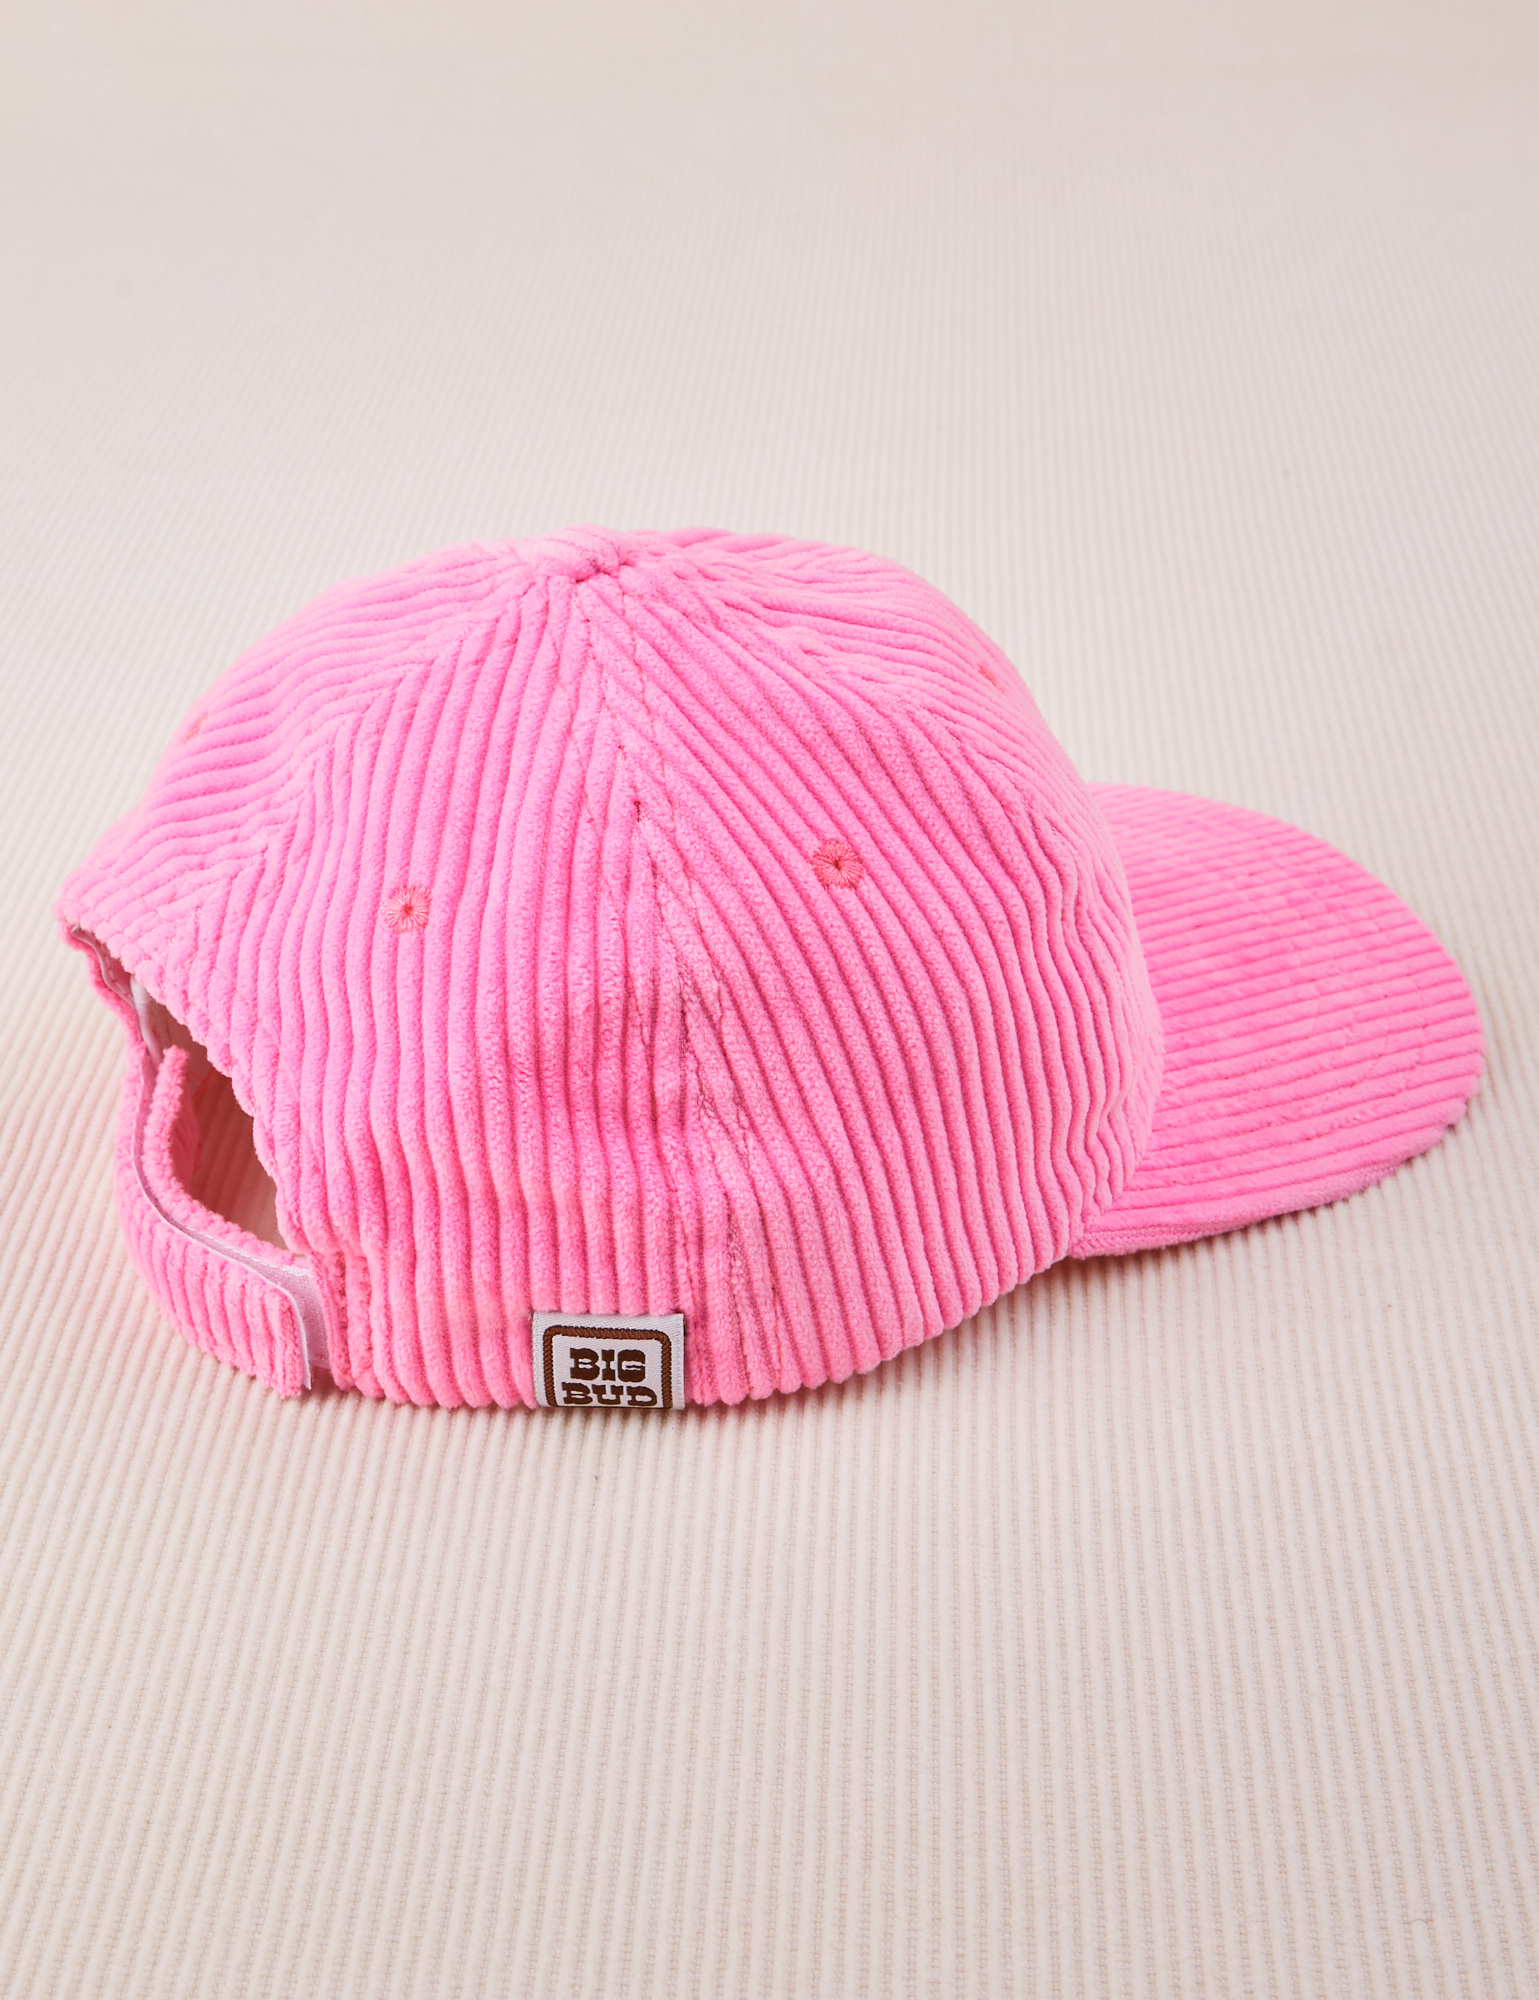 Side view of Dugout Corduroy Hat in Bubblegum Pink. Big Bud tag sewn on the side.